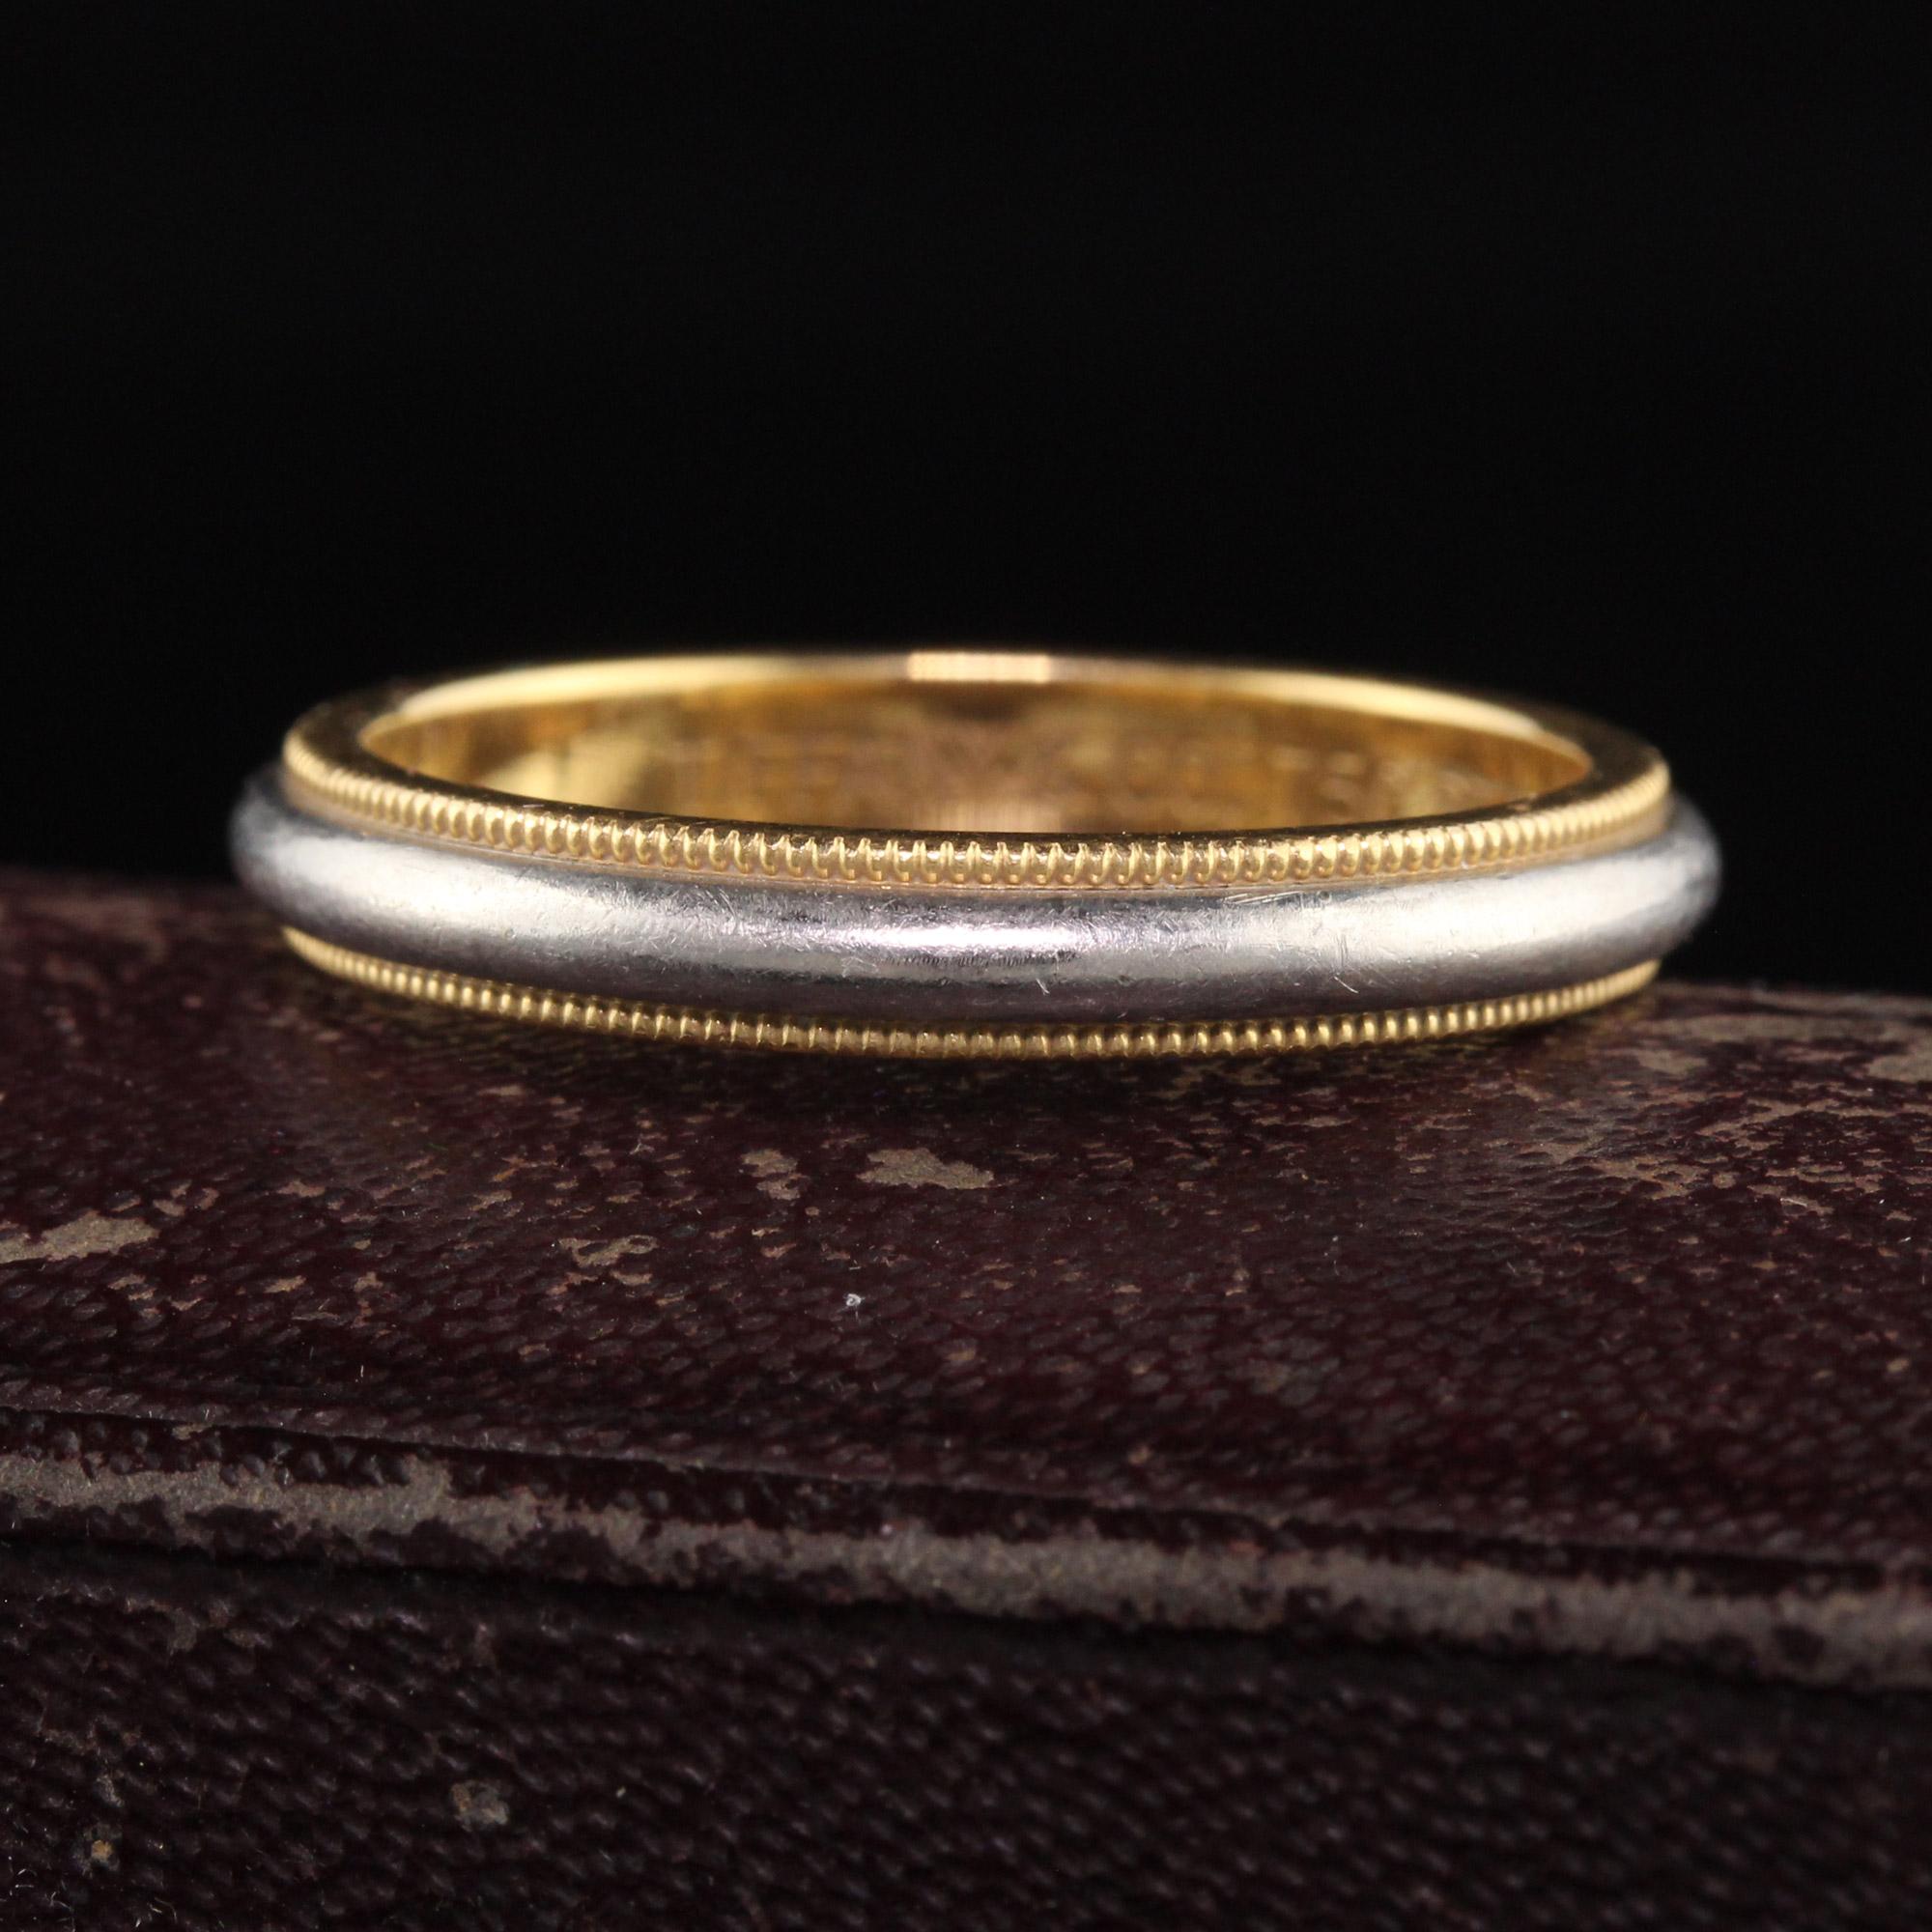 Beautiful Vintage Tiffany and Co 18K Yellow Gold and Platinum Wedding Band. This classic wedding band is crafted in 18k yellow gold and platinum. This classic ring has milgraining around the entire ring and the inside of the band is engraved 